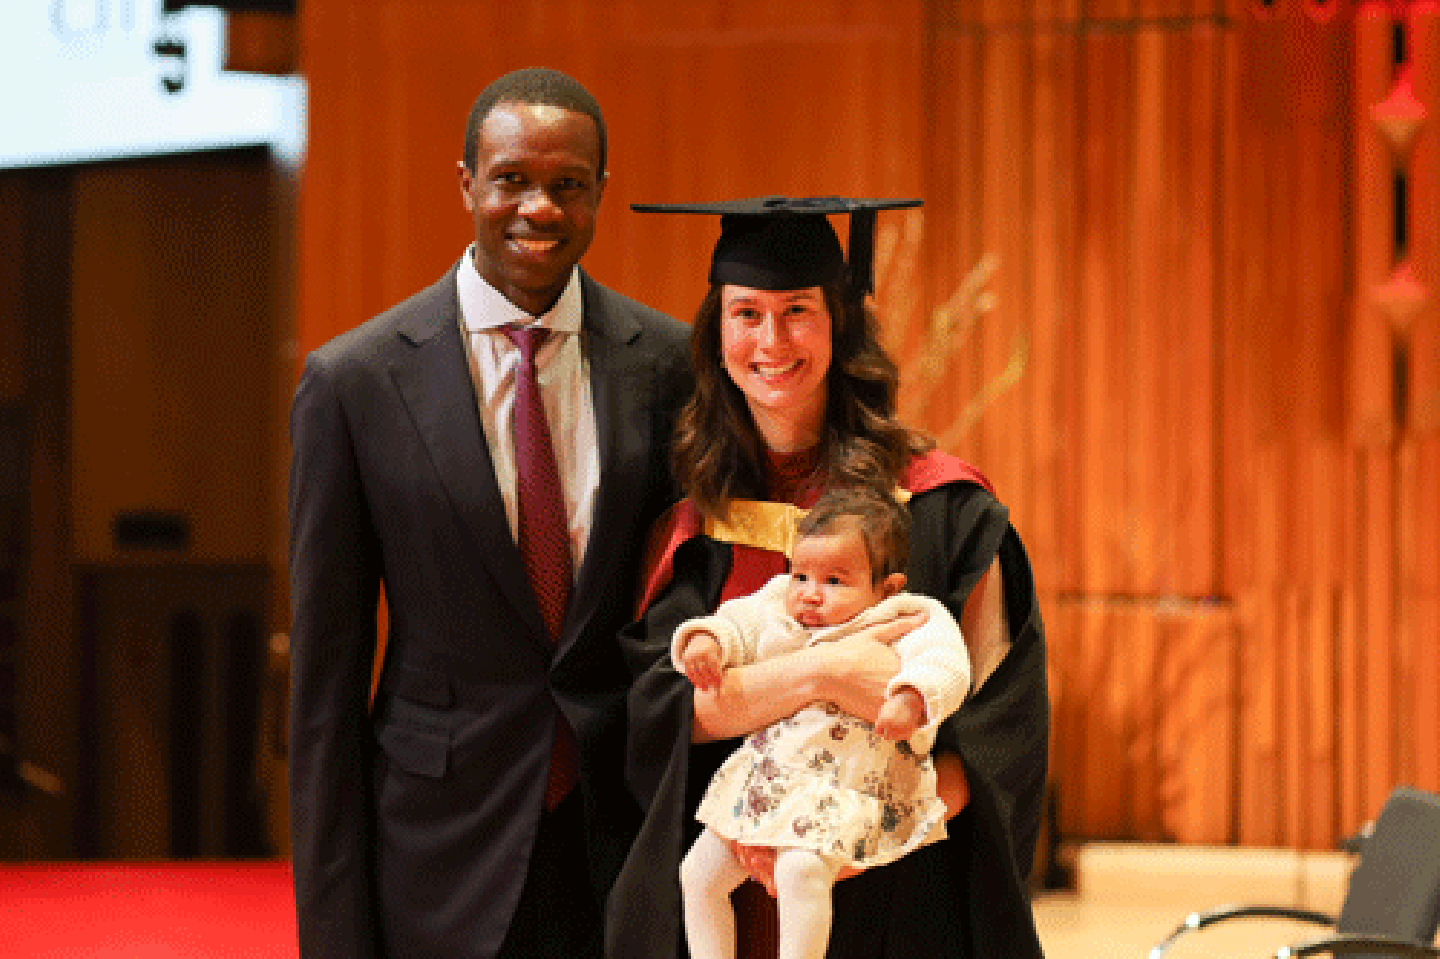 Student speaker, Rachel Preston with her husband Souleymane Ba and four-month old daughter Eleanor Ba